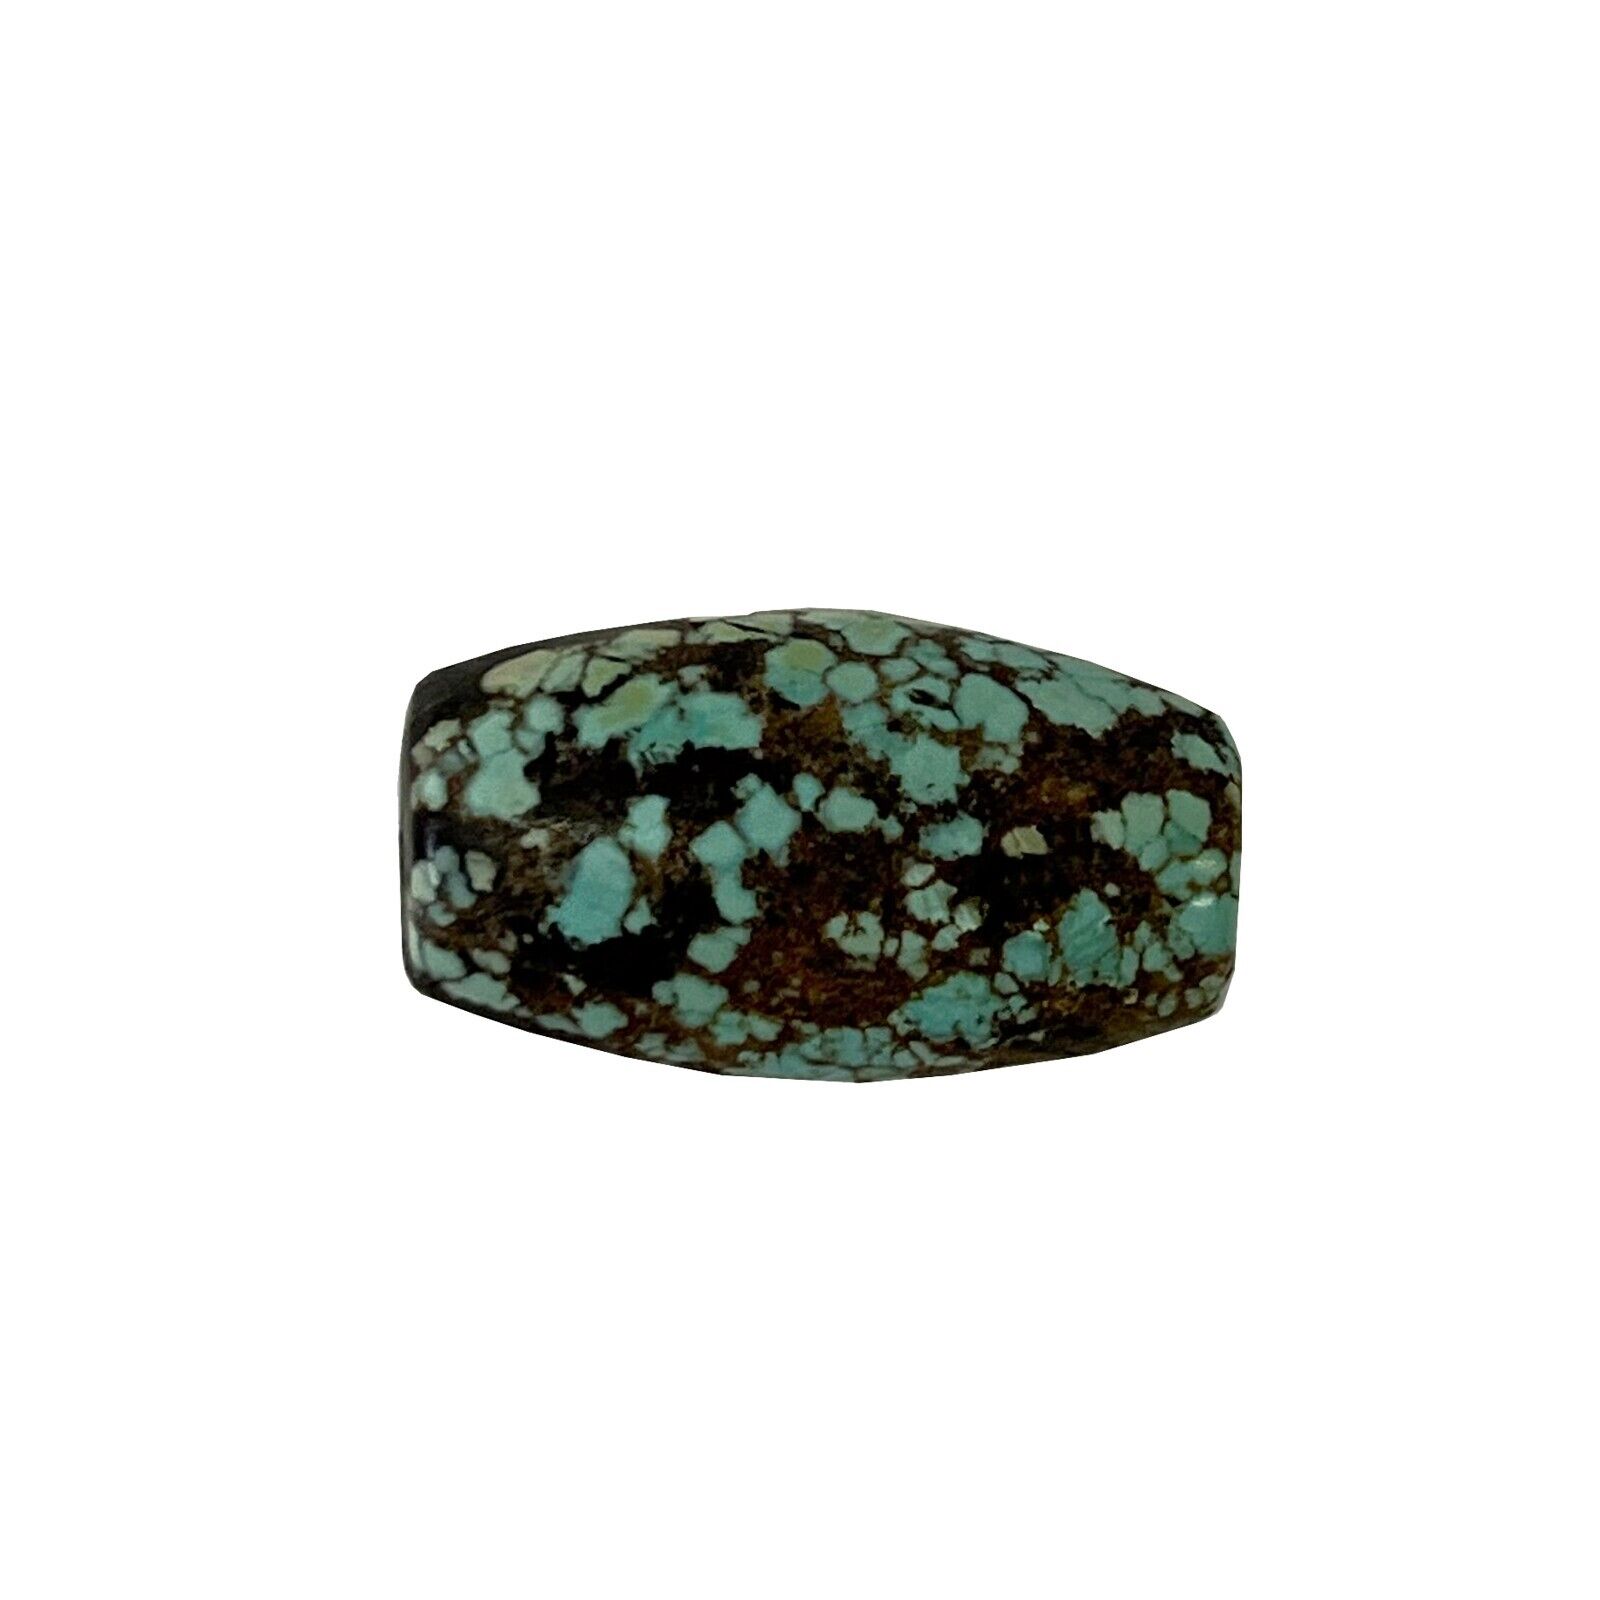 Chinese Handmade Stone Turquoise Pattern Oval Bead Pendant ws2409